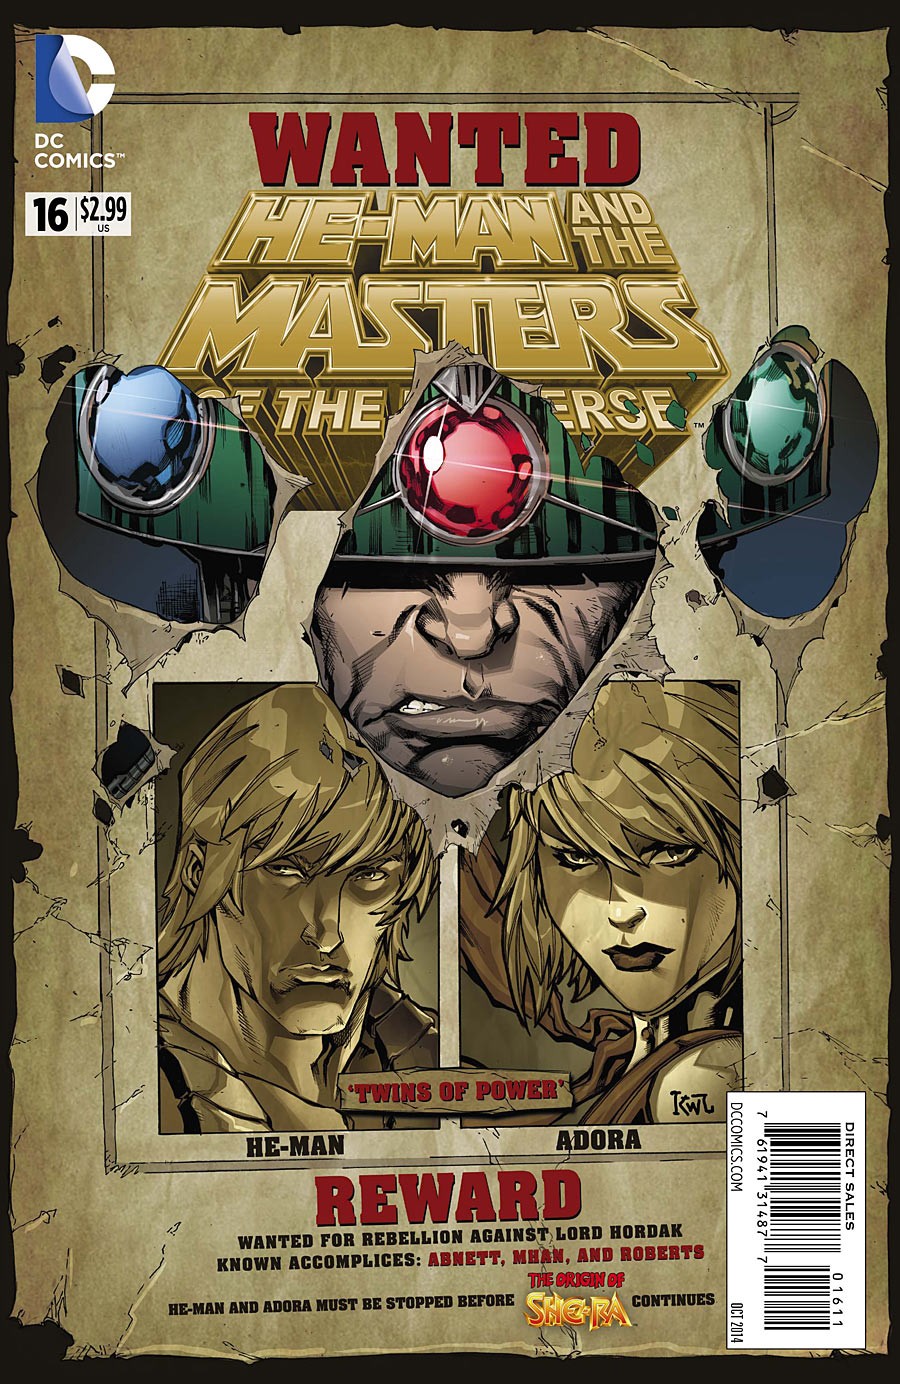 He-Man and the Masters of the Universe Vol. 2 #16